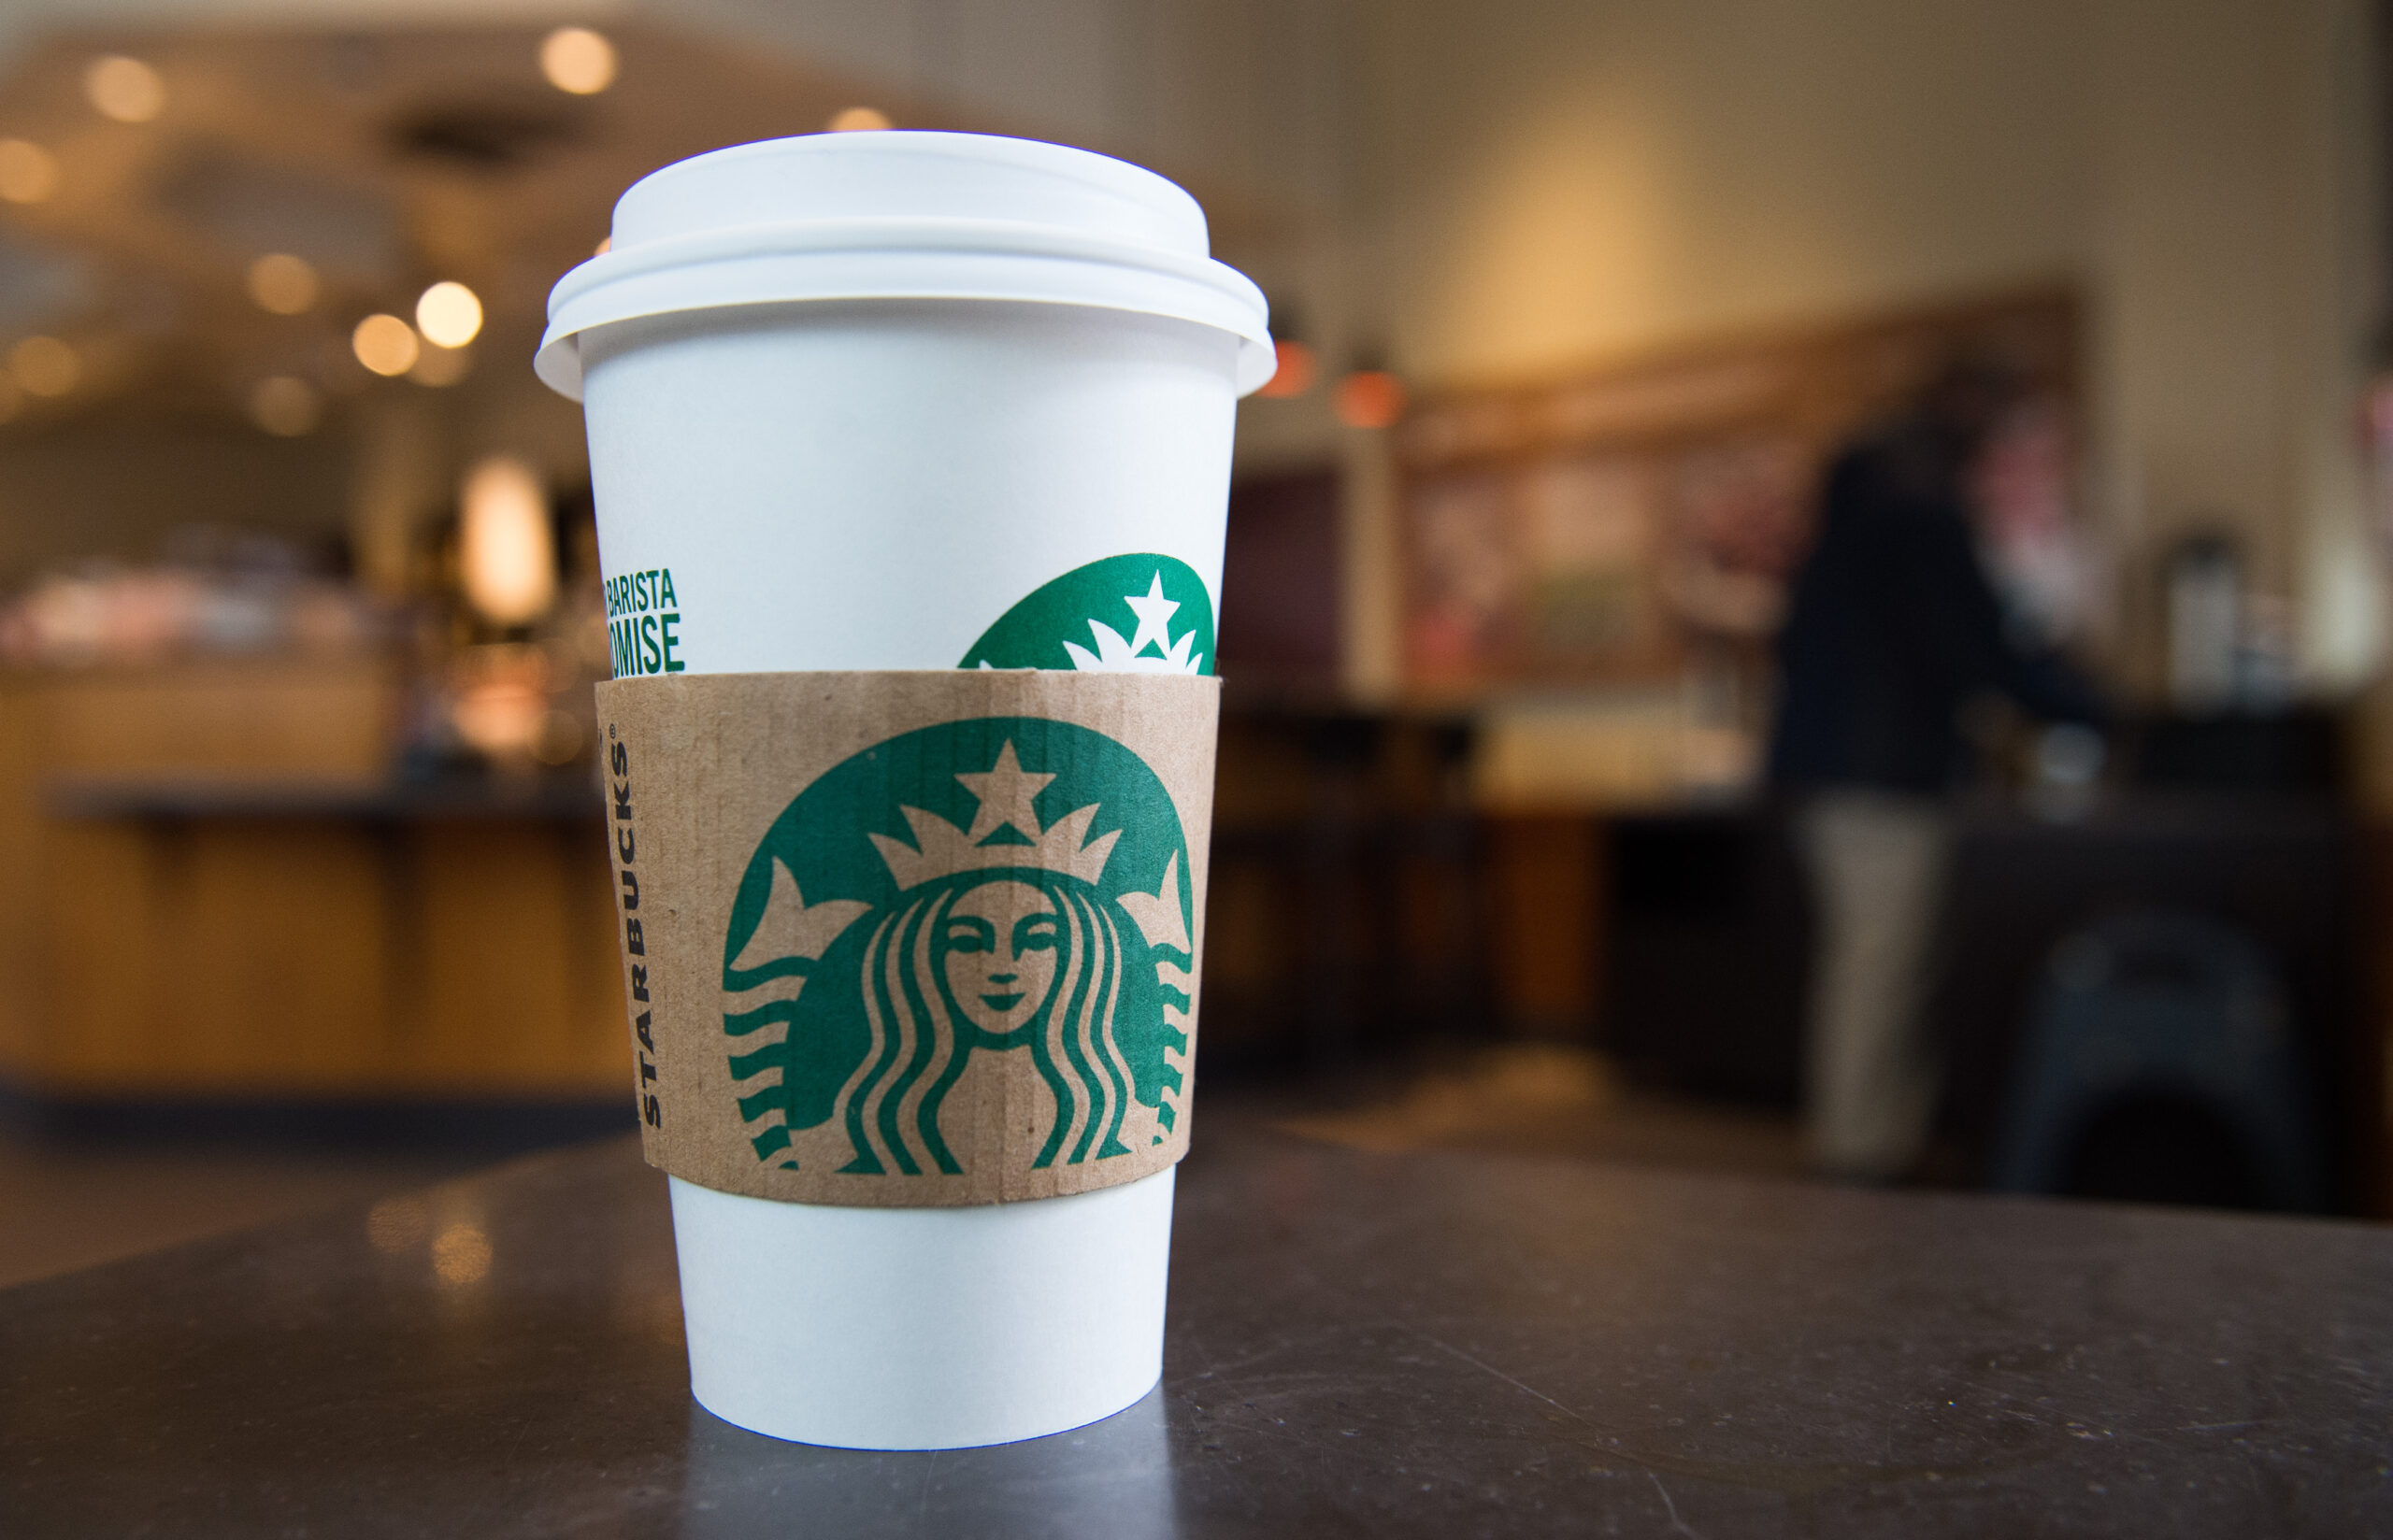 Are Starbucks Cups Recyclable?